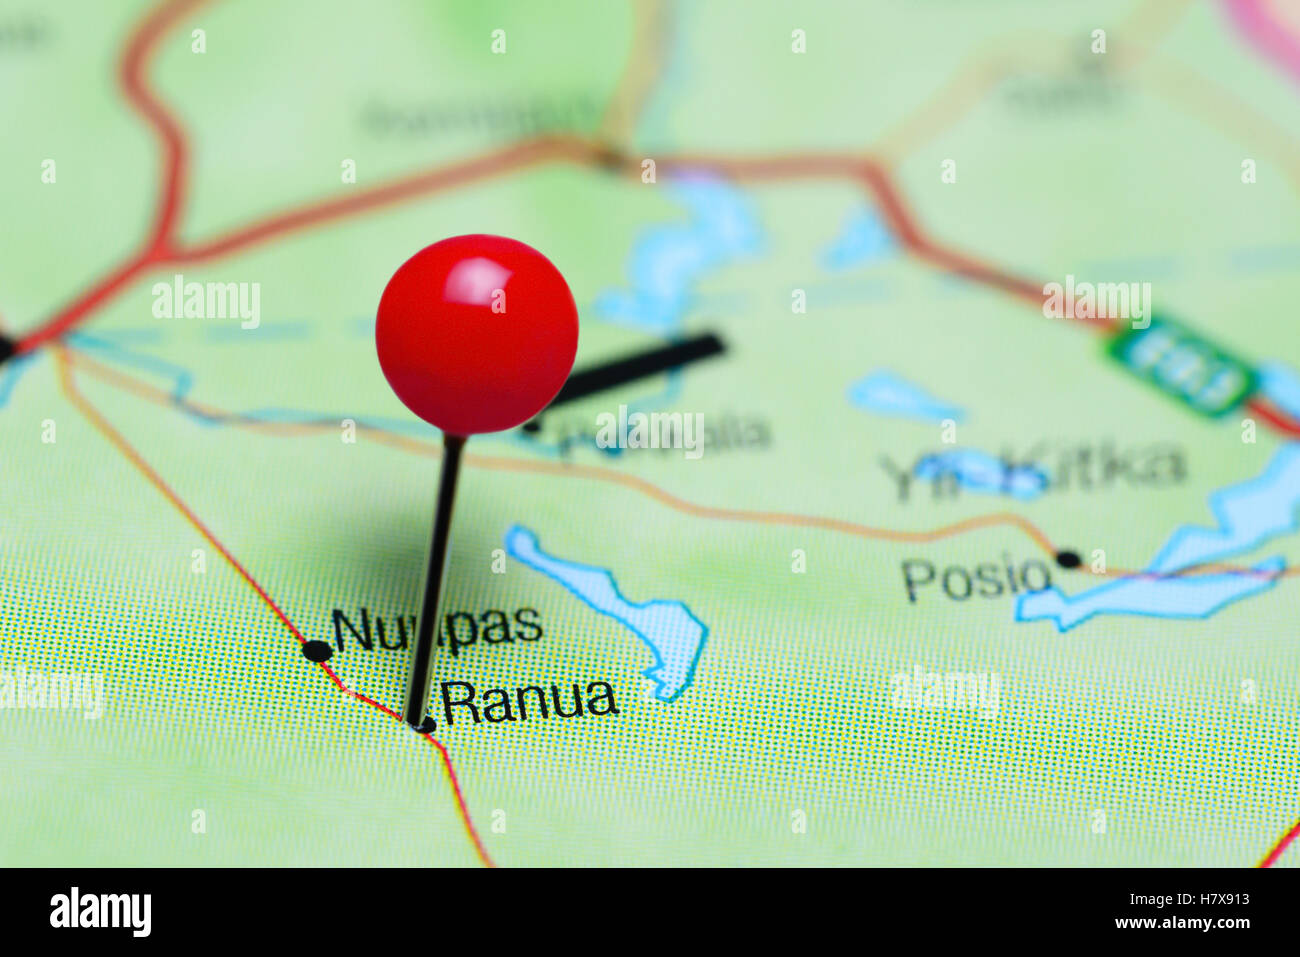 Ranua pinned on a map of Finland Stock Photo